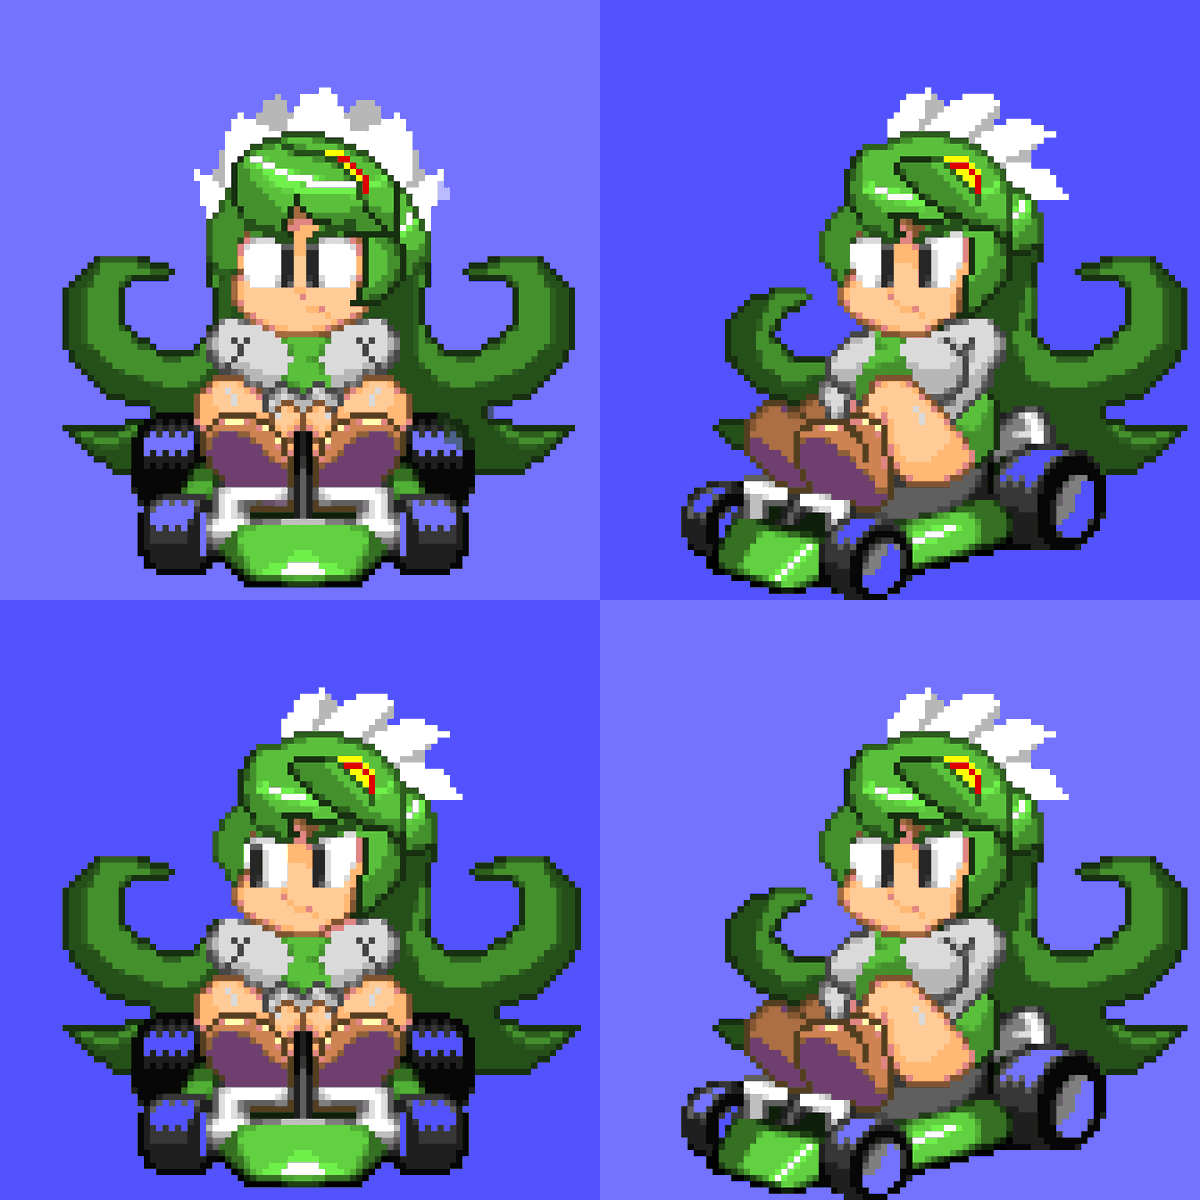 more progress on Filia in Ring Racers (small 10% complete)